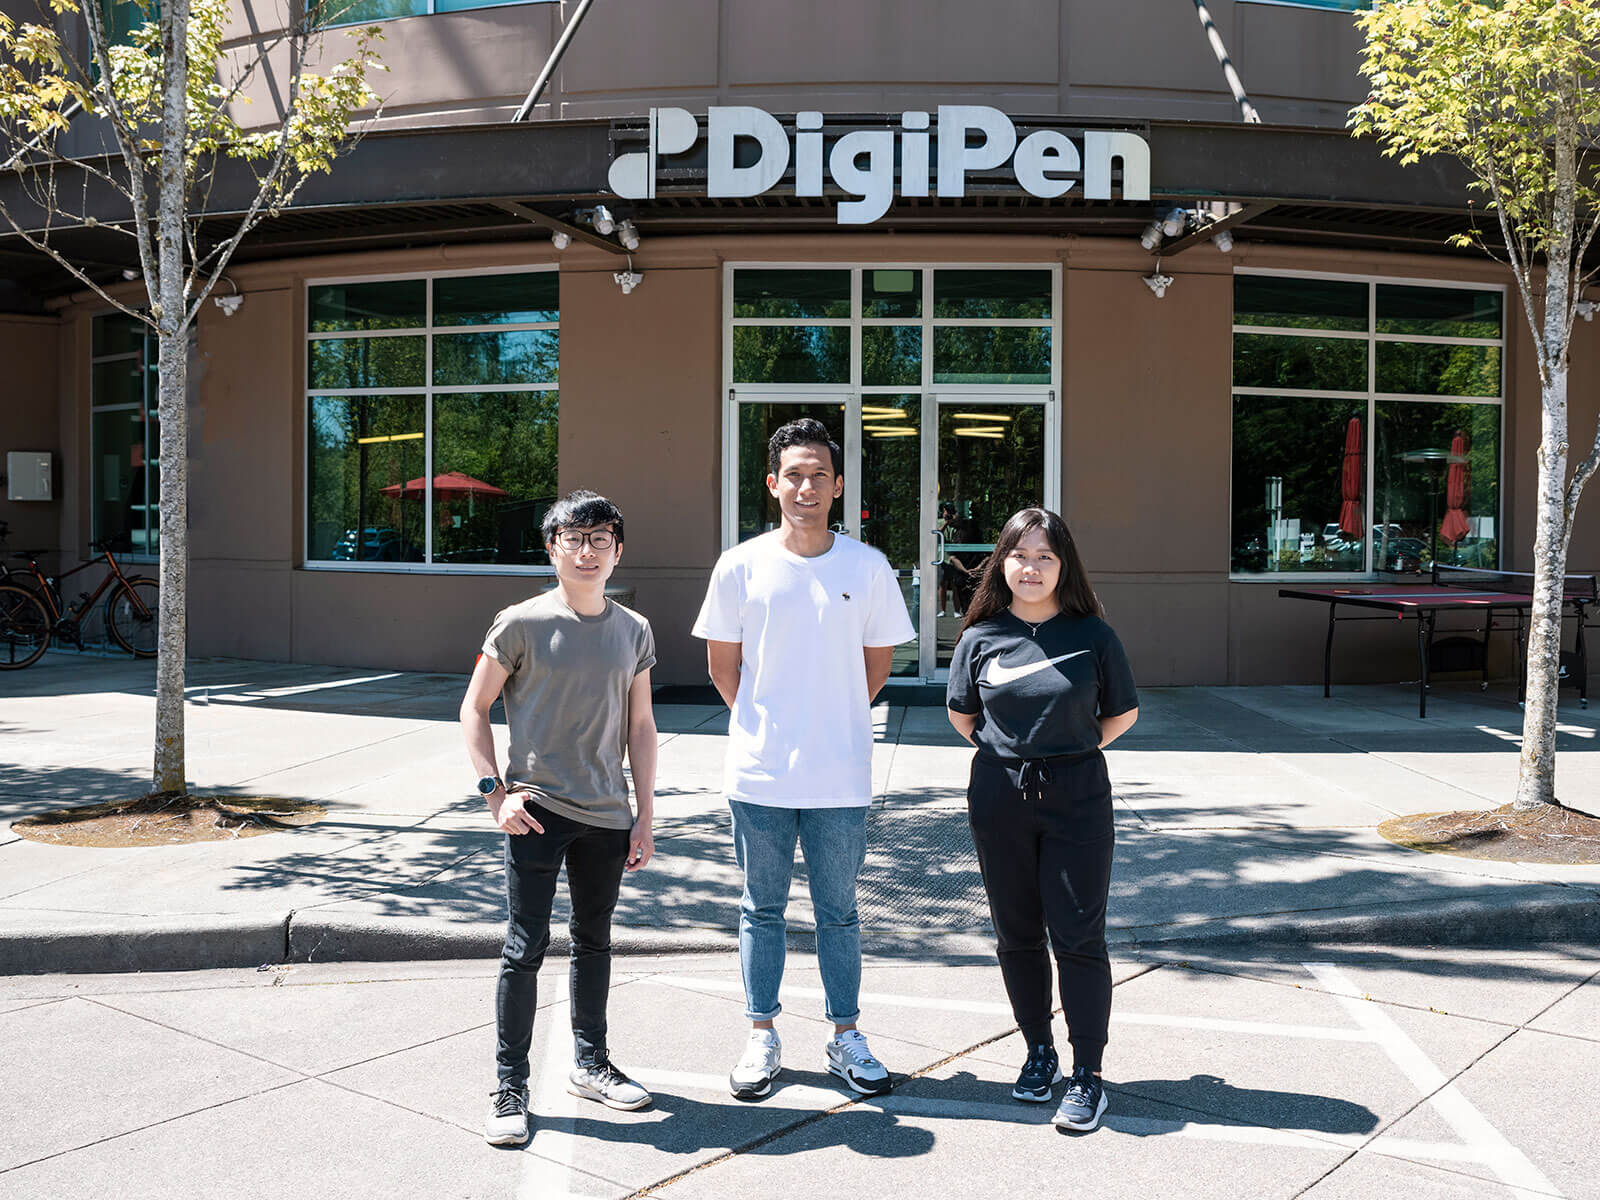 Three OIP students stand in front of the main doors of the DigiPen Redmond campus.